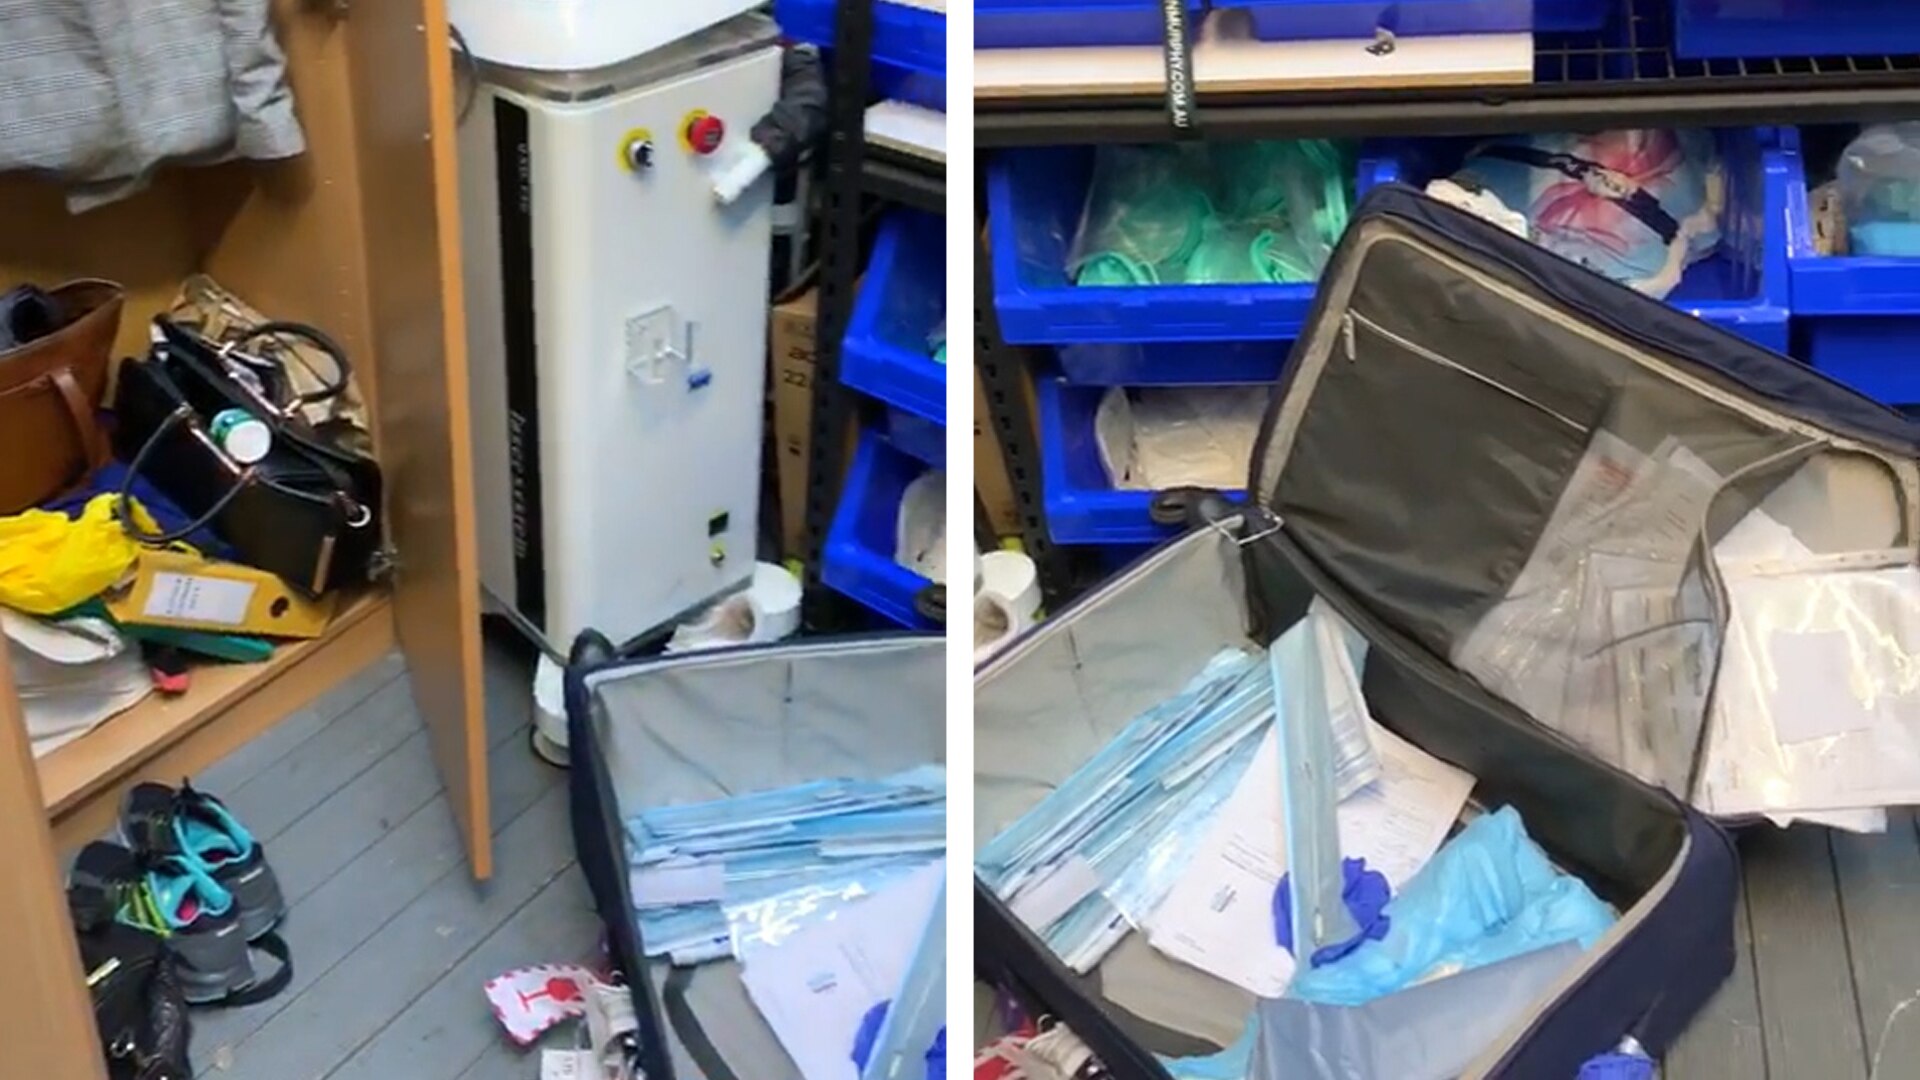 Storeroom inside Dr Lanzer clinic in Sydney shows medical equipment